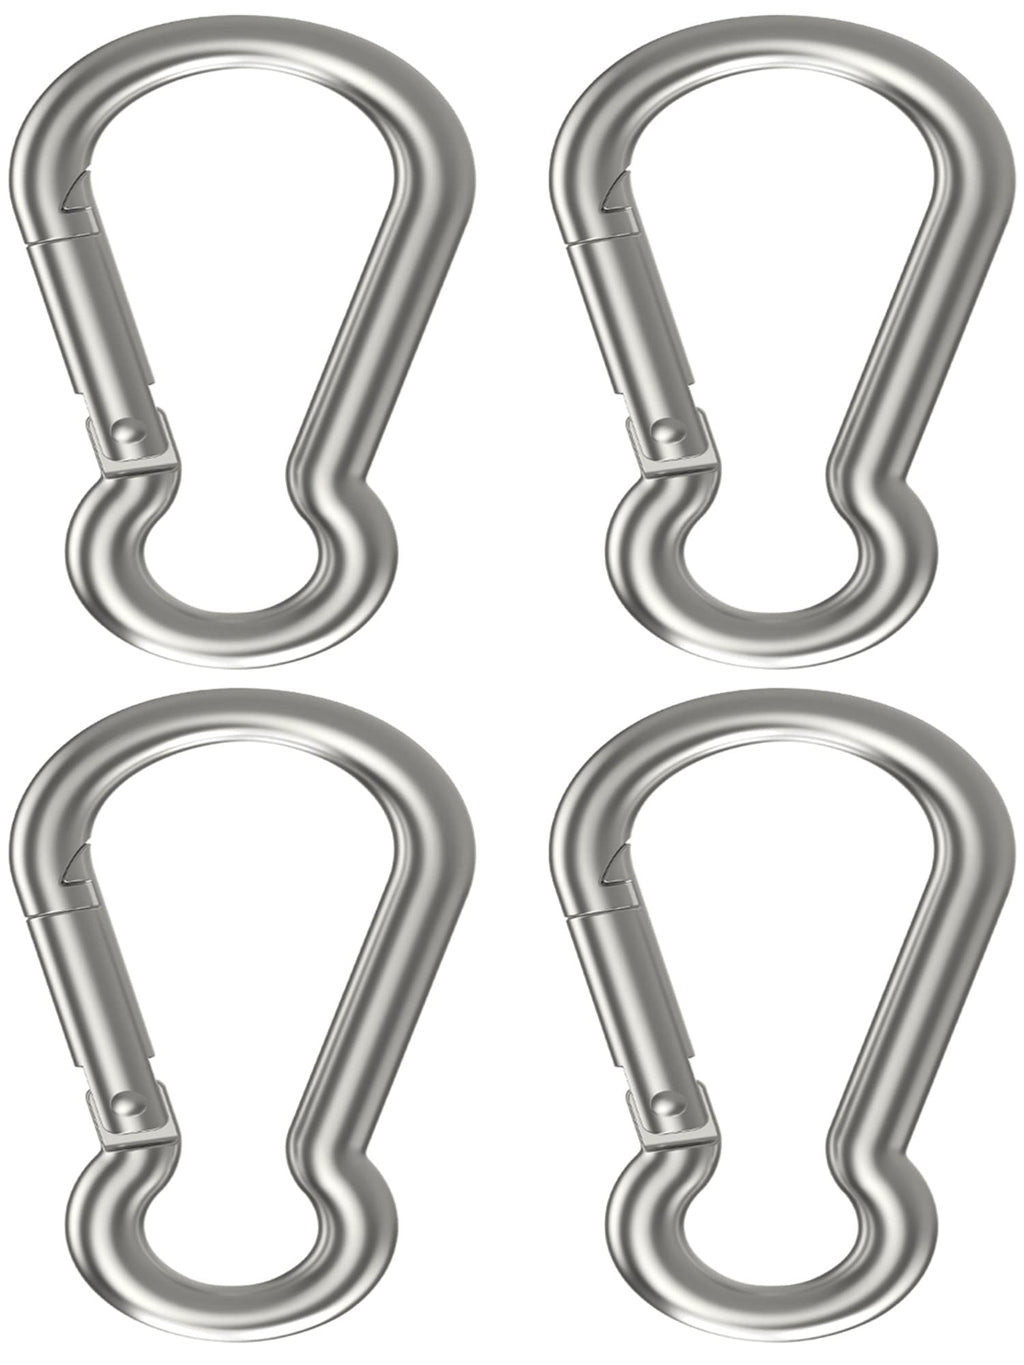 3 Inch Spring Snap Hook 304 Stainless Steel Quick Link Snap Hook Clips 4 Pcs